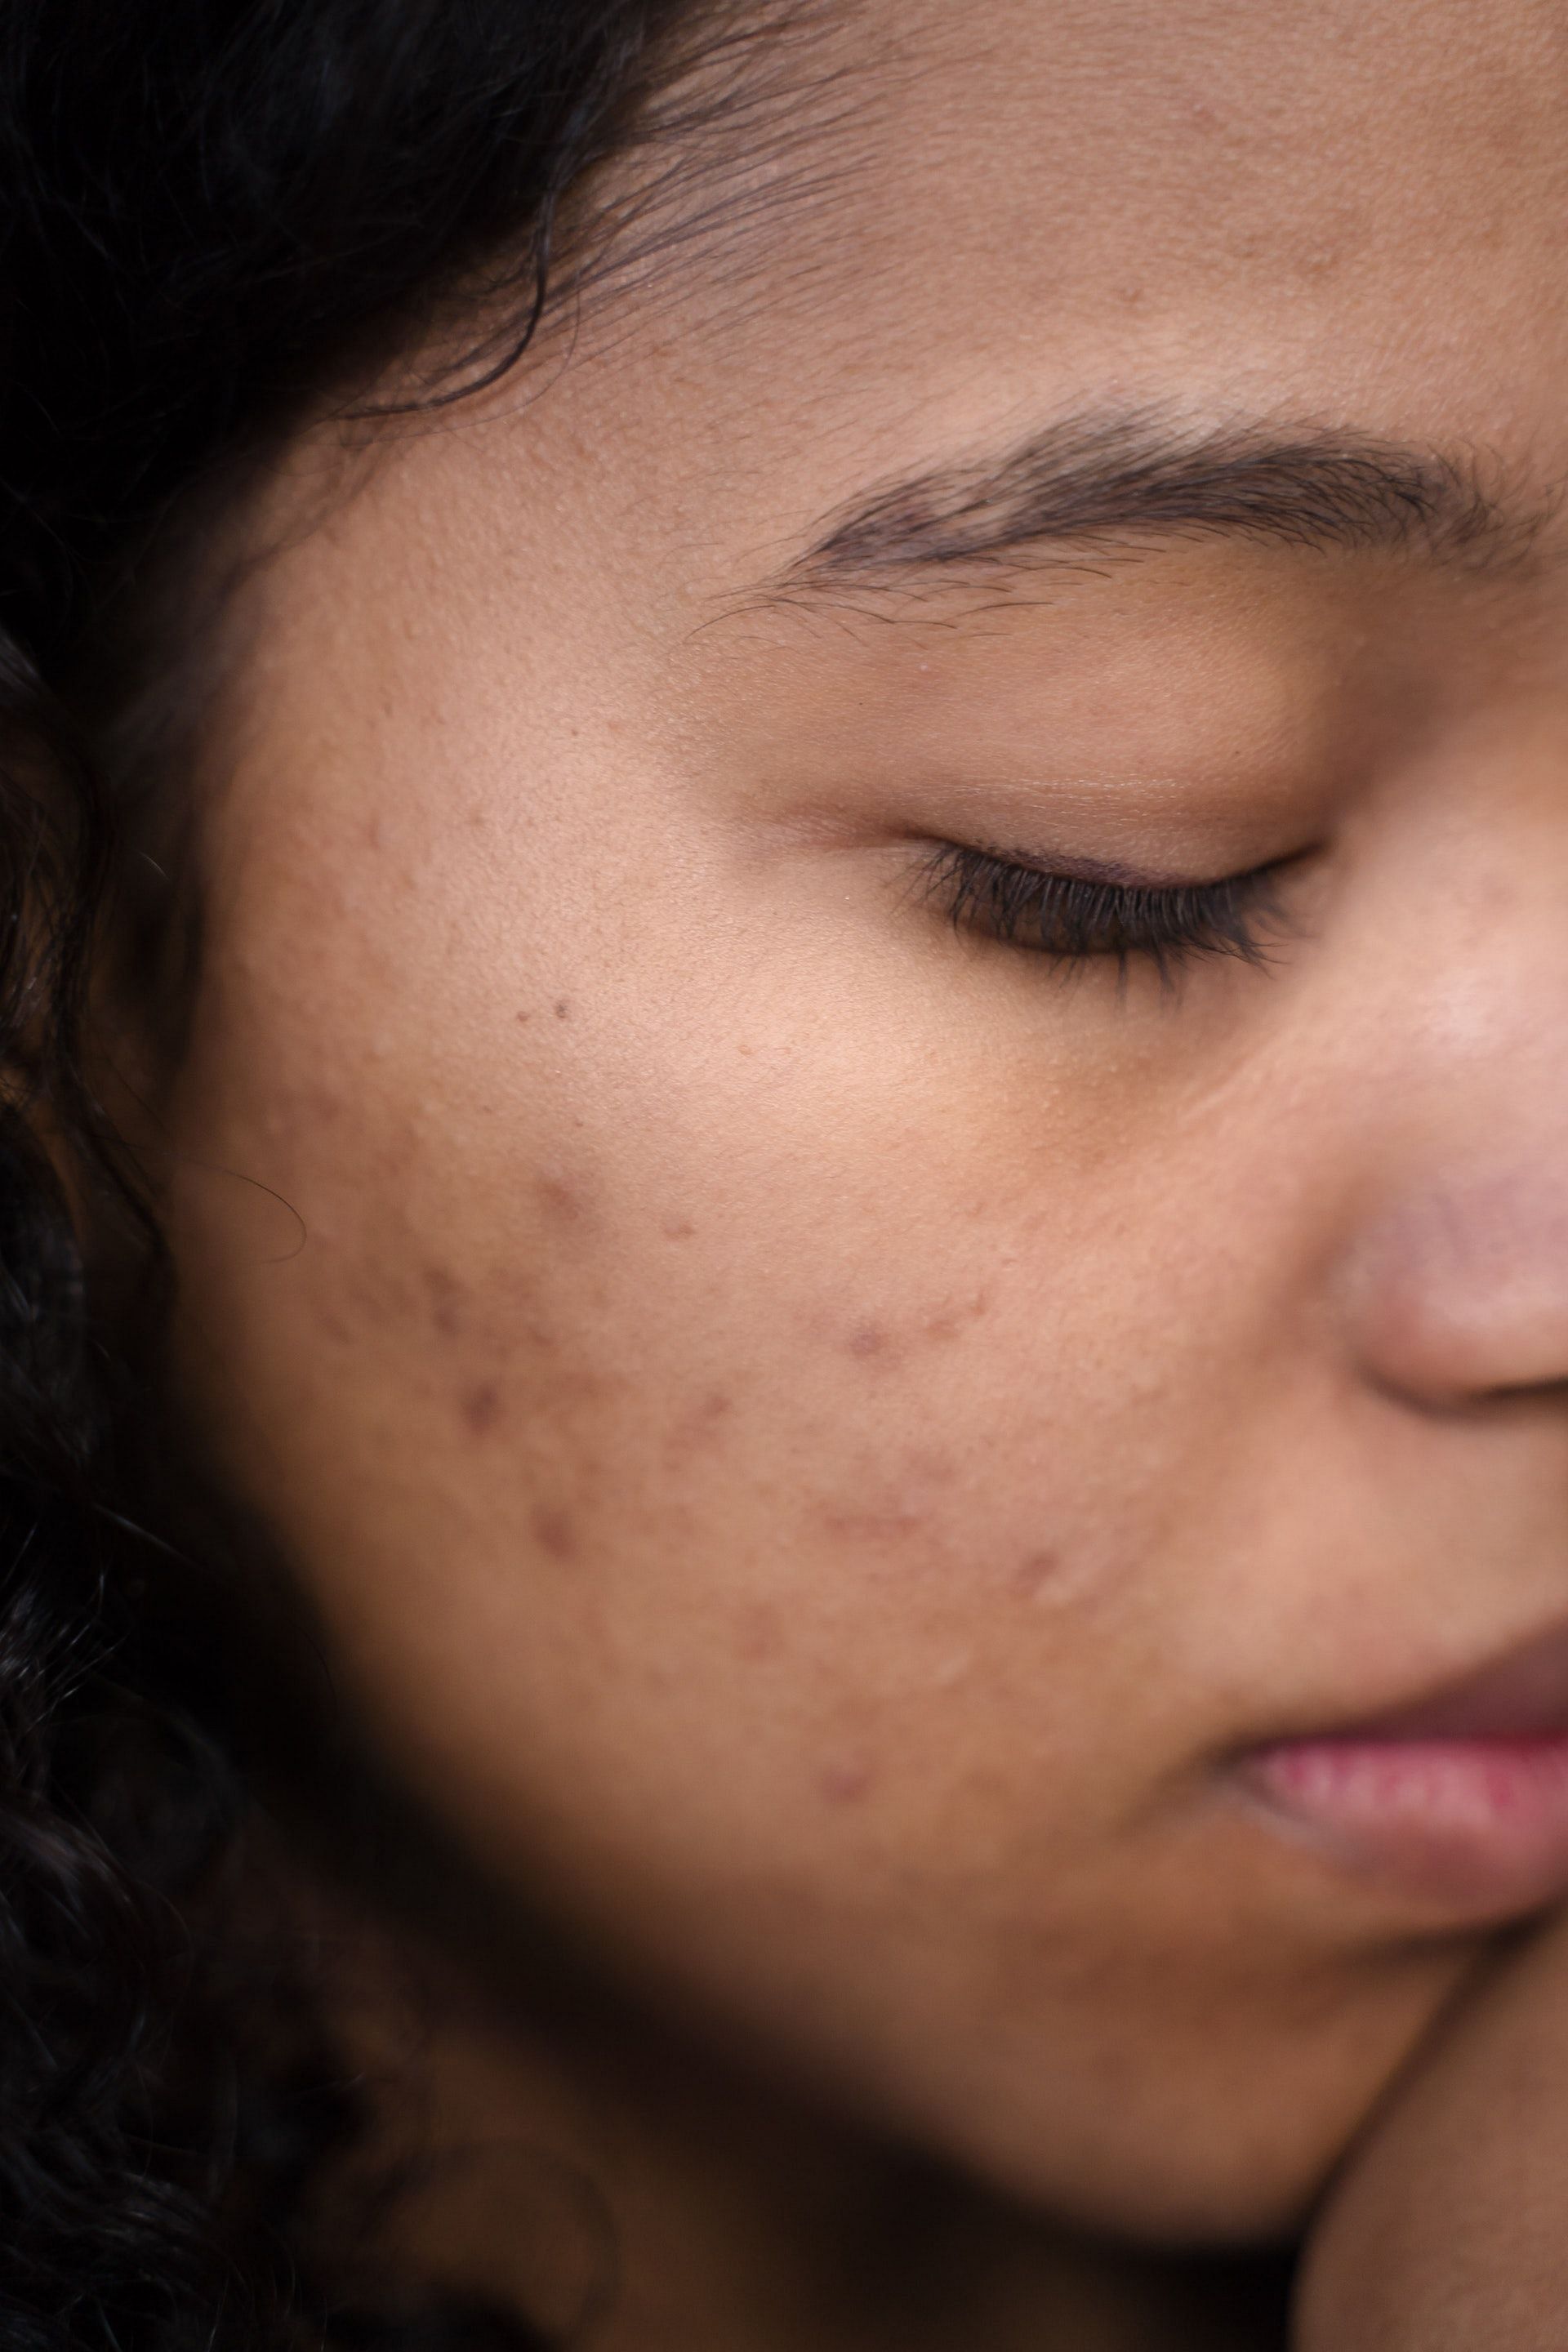 Scrubbing helps in removal of Body acne (Image by Ron Lach/Pexels)